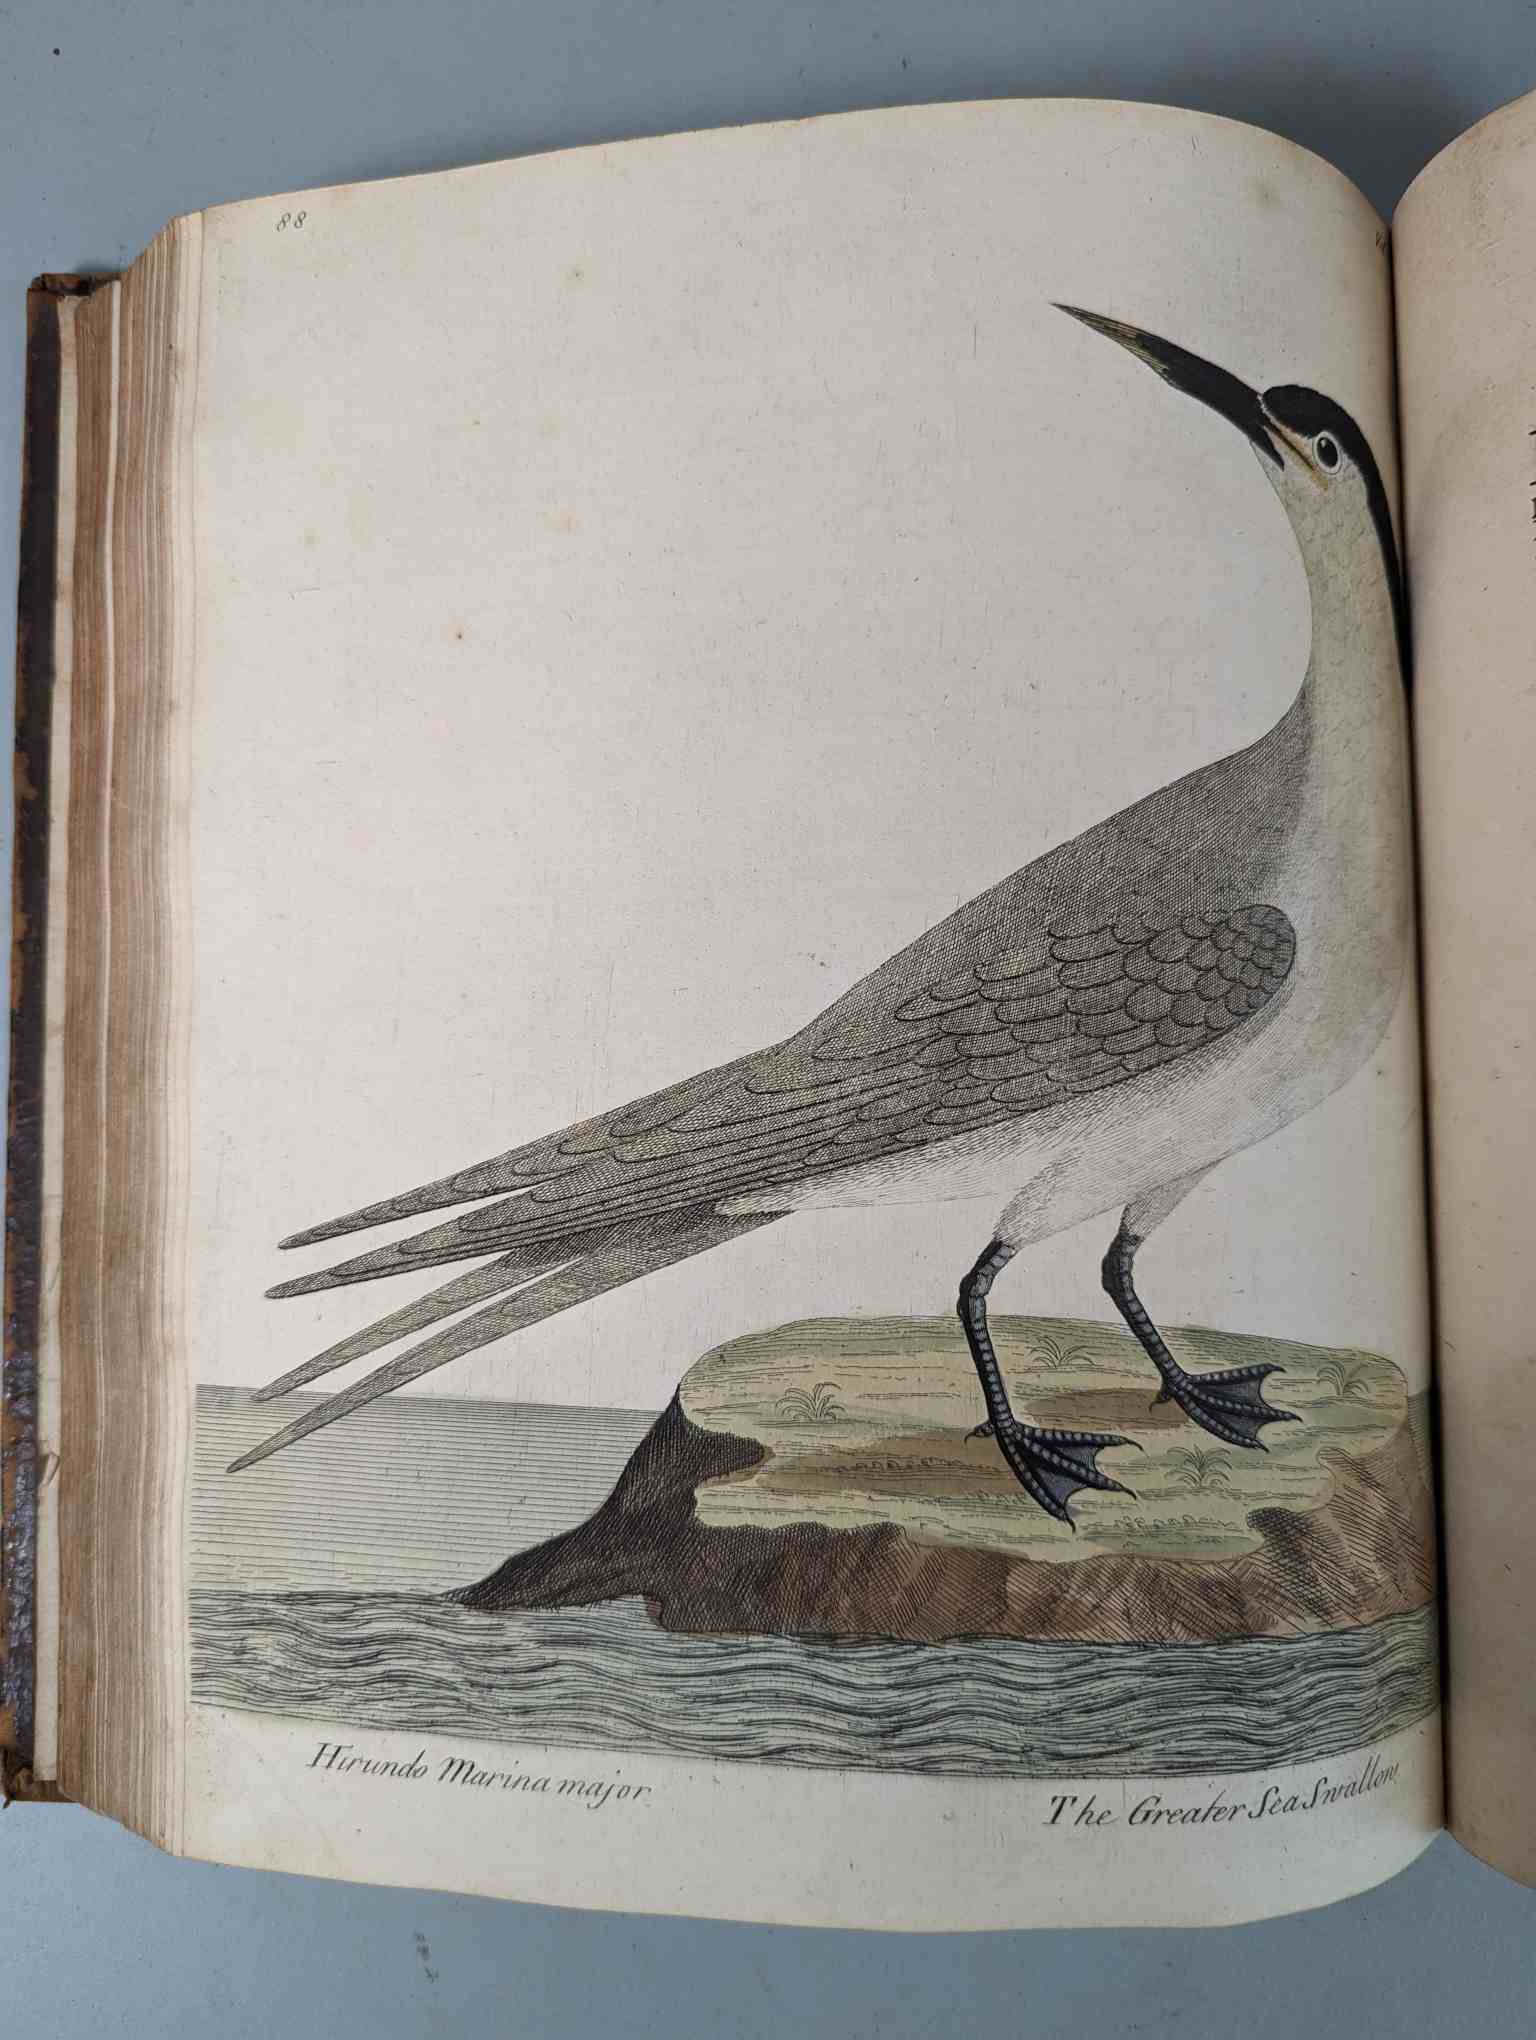 ALBIN, Eleazar. A Natural History of Birds, to which are added, Notes and Observations by W. - Image 192 of 208